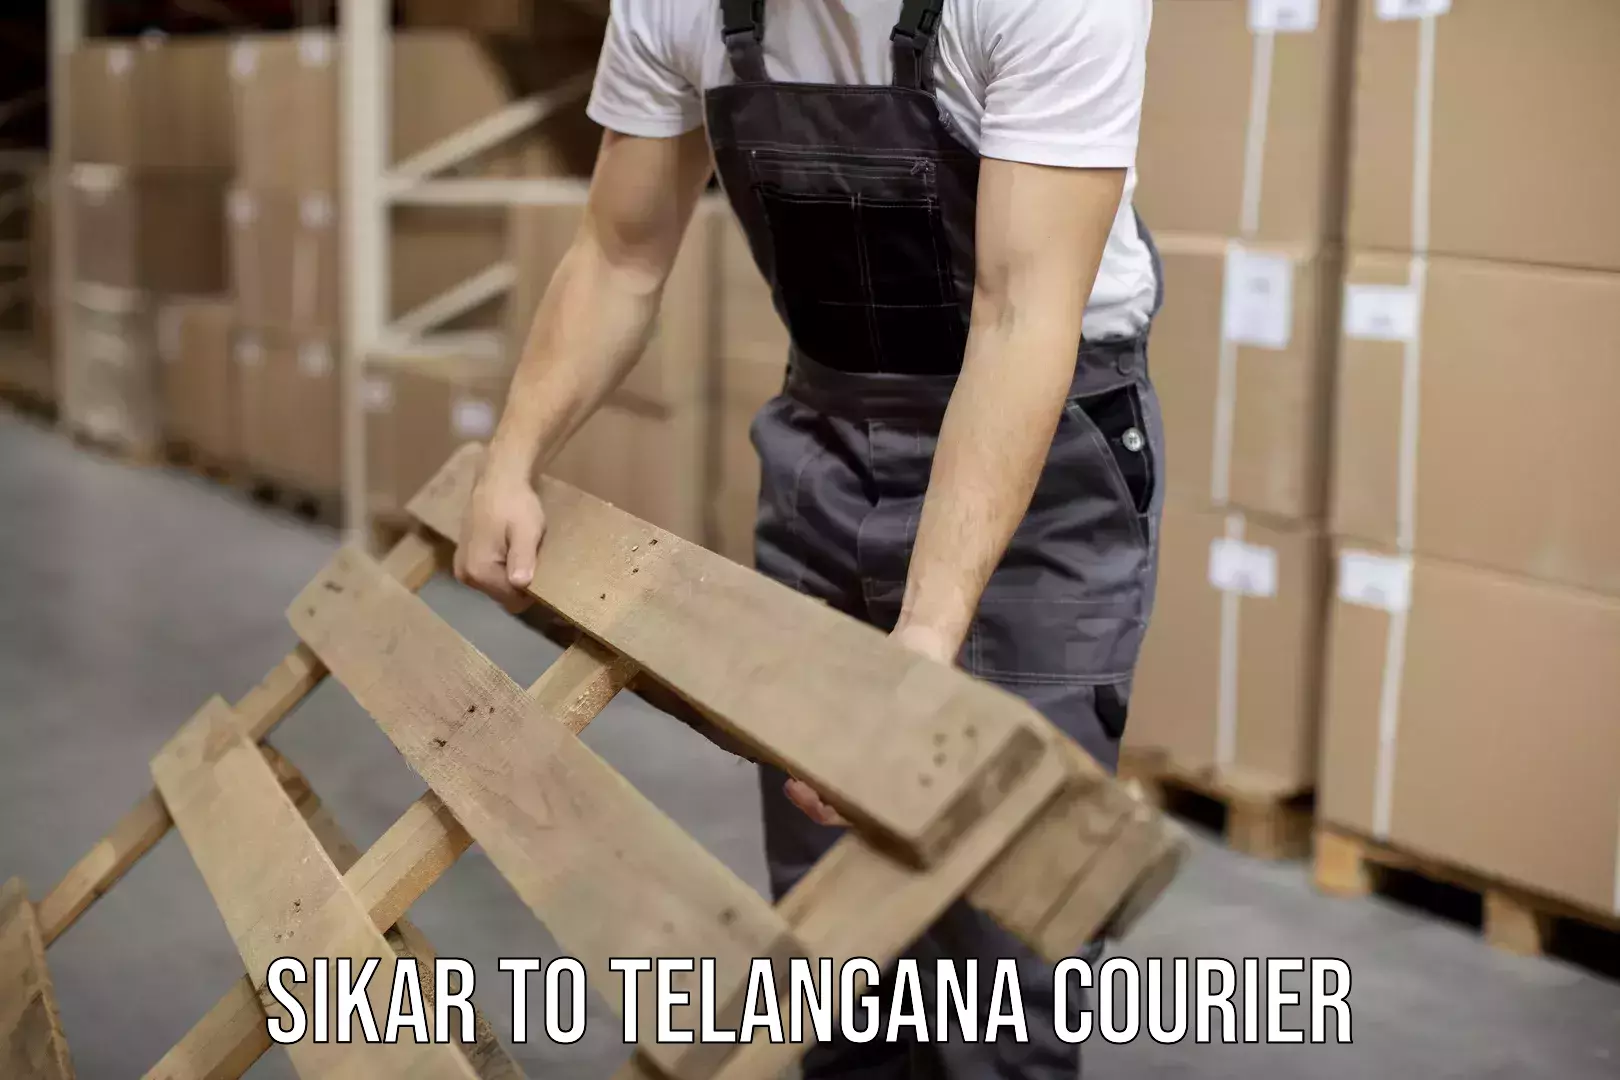 Professional courier handling Sikar to Achampet